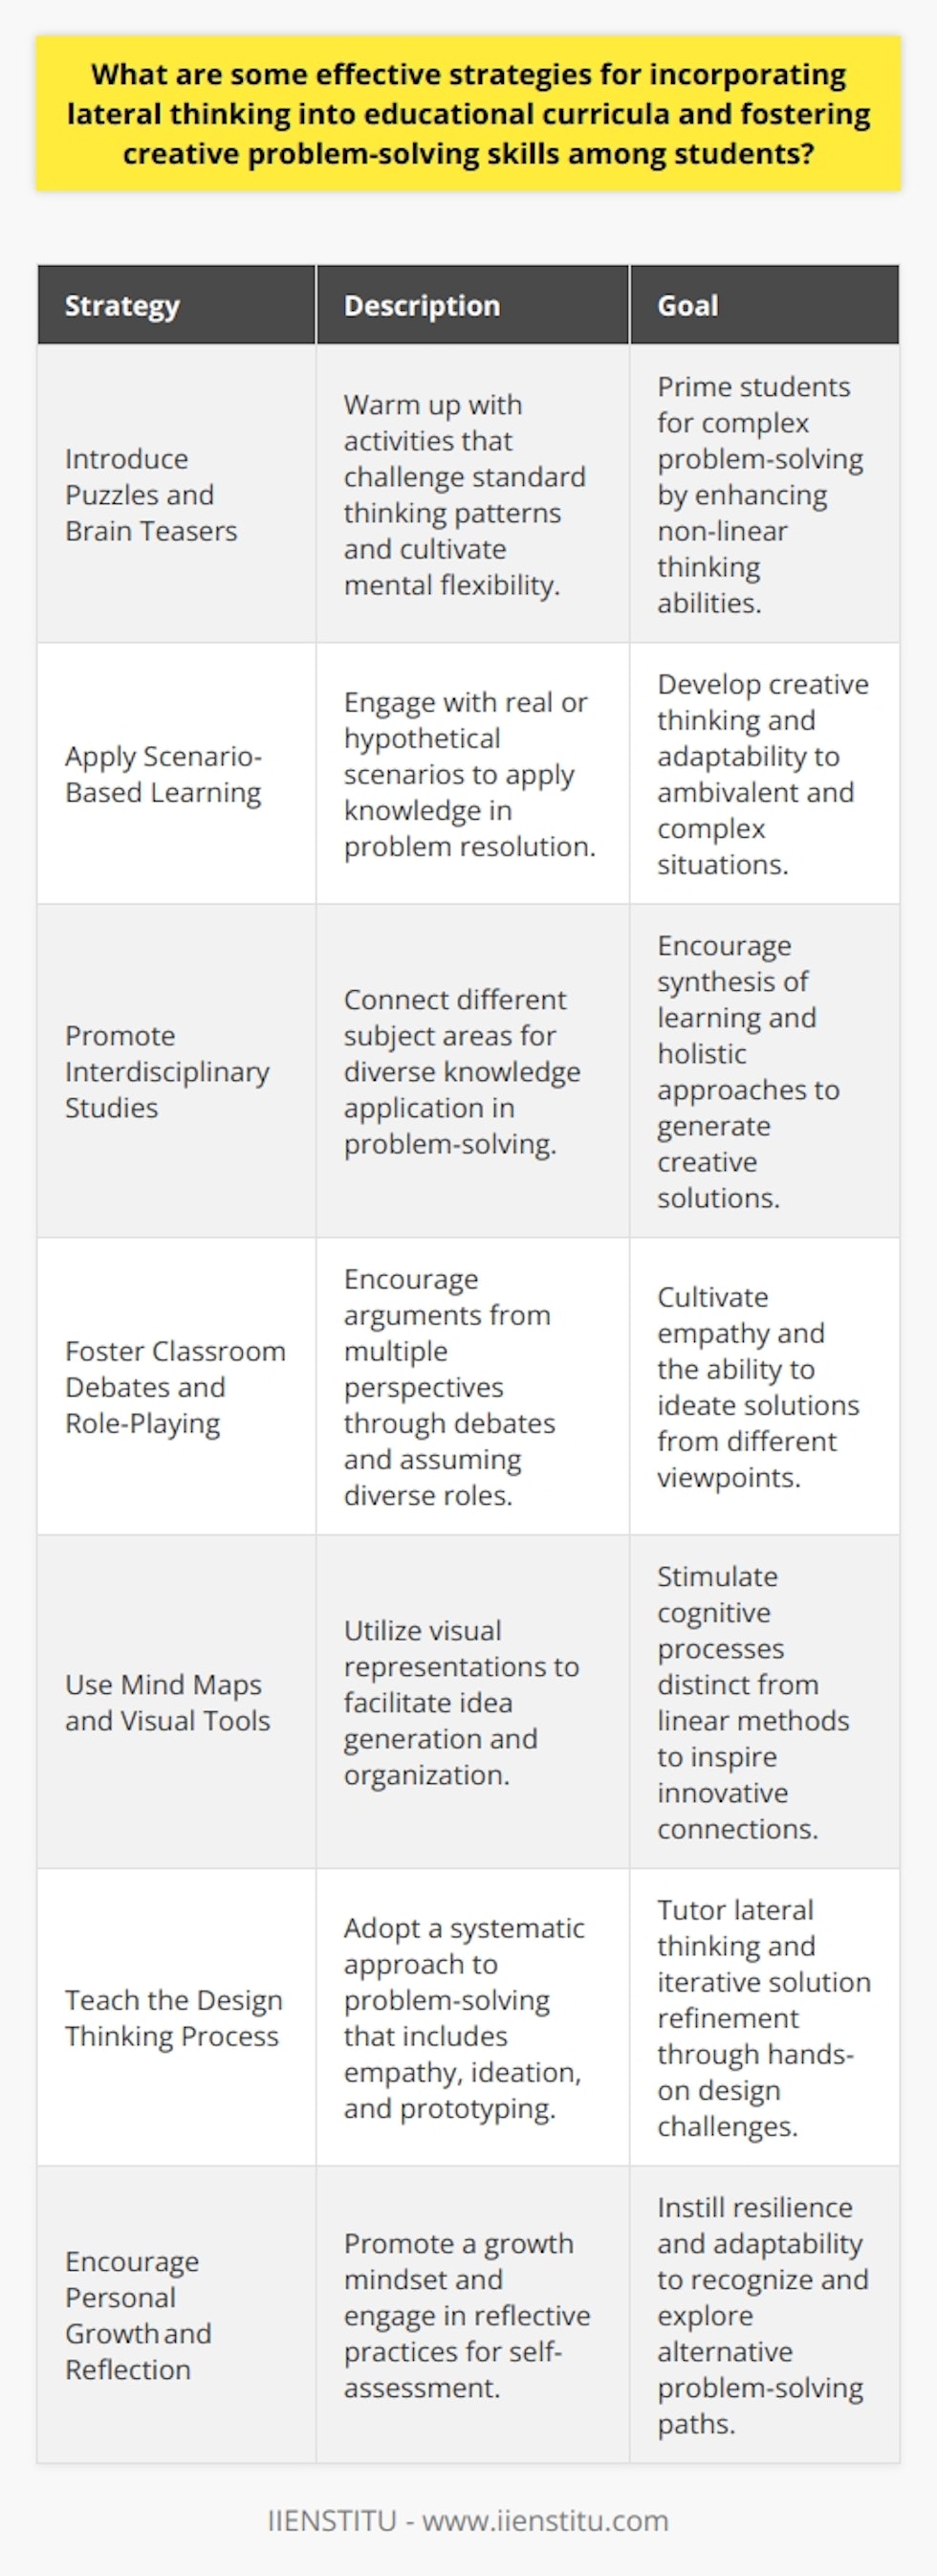 In today’s rapidly evolving world, students facing complex challenges need a robust skill set that includes creative problem-solving. Lateral thinking, a concept devised by Edward de Bono, emphasizes an indirect and creative approach to reasoning that is not immediately obvious. Here are some effective strategies for incorporating lateral thinking into educational curricula to develop creative problem-solving skills among students.**Introduce Puzzles and Brain Teasers**Starting with brain teasers and puzzles can warm up students’ minds to alternative ways of thinking. These activities challenge standard patterns of thought and help to cultivate mental flexibility. This can prime students for more significant problem-solving tasks where they need to look beyond conventional solutions.**Apply Scenario-Based Learning**Scenario-based learning tasks immerse students in real or hypothetical situations where they must apply their knowledge to solve problems. This method puts the students’ creative thinking to the test as they navigate through the ambiguity and complexity similar to real-world problems, developing their capacity to think laterally and come up with innovative solutions.**Promote Interdisciplinary Studies**Lateral thinking thrives in an interdisciplinary context. By connecting concepts from different subject areas, students can draw upon diverse knowledge bases and methodologies for problem resolution. This holistic approach can lead to more creative and viable solutions, as students are encouraged to synthesize their learning and apply it comprehensively.**Foster Classroom Debates and Role-Playing**Open-ended debates and role-playing exercises can challenge students to argue from different perspectives or contexts. By taking on a role or defending a position opposite to their own, students learn to understand and formulate arguments from a spectrum of viewpoints. This exercise cultivates empathy and the ability to identify innovative solutions that might exist outside one’s initial line of thinking.**Use Mind Maps and Visual Tools**Mind mapping and other visual tools can help in generating and organizing ideas. Encouraging students to visualize problems and their possible solutions allows for a different cognitive process than linear note-taking and can lead to bursts of inspiration and unexpected links between ideas.**Teach the Design Thinking Process**Design thinking, with its emphasis on empathy, ideation, prototyping, and testing, offers a framework for creative problem-solving. By allowing students to empathize with end-users, brainstorm various ideas, create prototypes, and then refine these solutions through feedback, the design thinking process inherently teaches lateral thinking.**Encourage Personal Growth and Reflection**Instilling a growth mindset in the classroom can equip students with the resilience to see failure as a stepping stone to success. Reflective practices, where students look back on their problem-solving processes and outcomes, can teach adaptability and the recognition of alternative paths.By integrating these lateral thinking strategies into educational curricula, educators can create learning experiences that are not just informative but transformative. These methods aim to equip students with the mental agility to approach unpredictability with confidence and creativity, ensuring they are prepared for future challenges.Courses offered by IIENSTITU, for example, can further support educators and students in the development of lateral thinking and creative problem-solving skills. By combining such resources with thoughtful curriculum design, education can shift from a traditional, linear model to one that values complexity and innovation in thought.